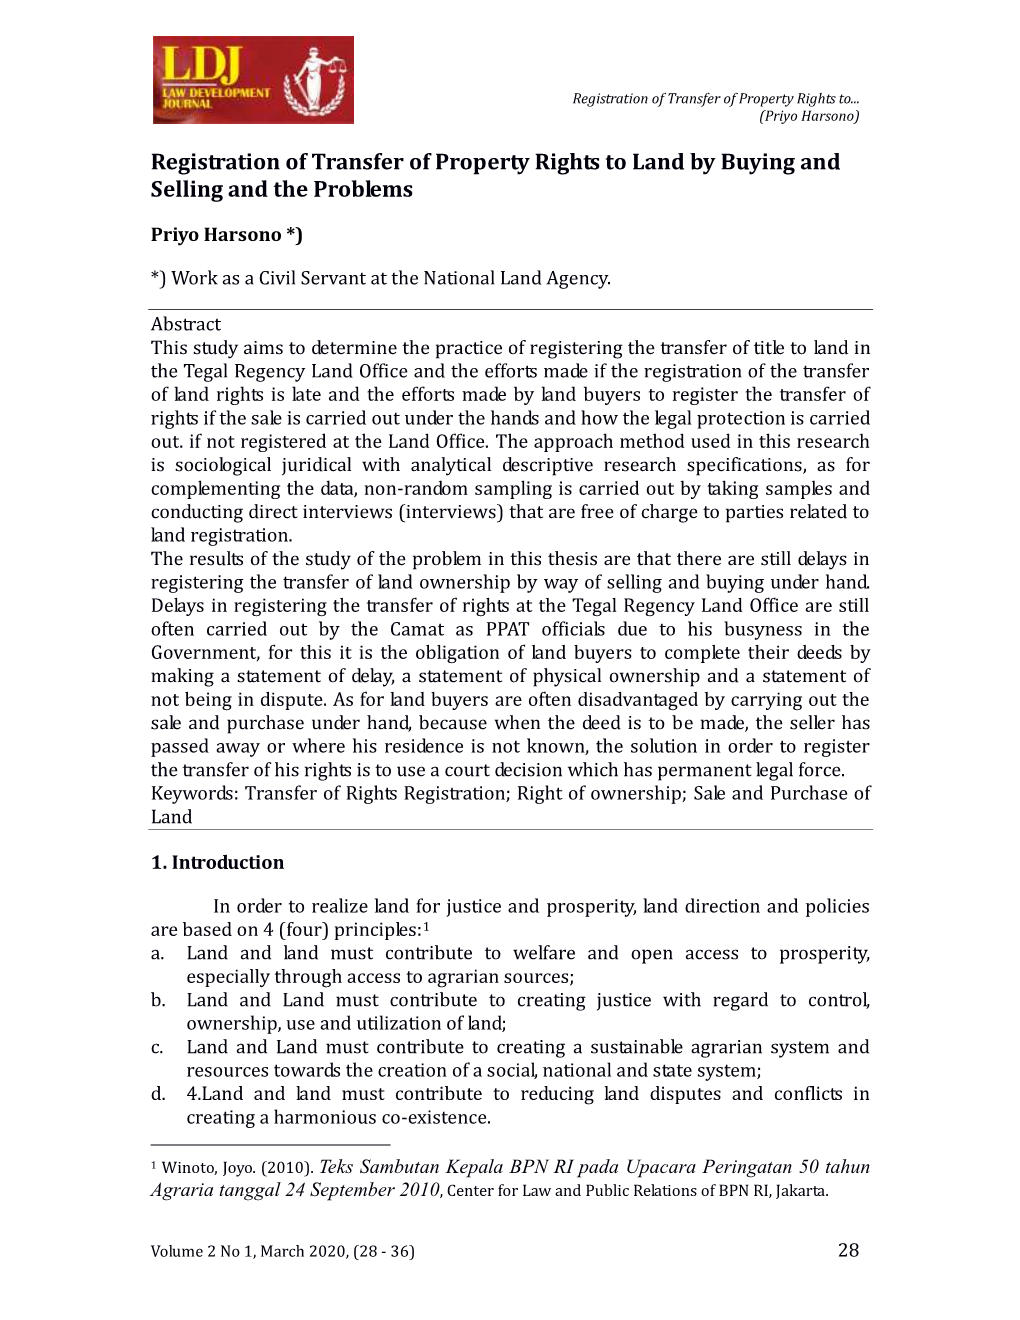 Registration of Transfer of Property Rights to Land by Buying and Selling and the Problems